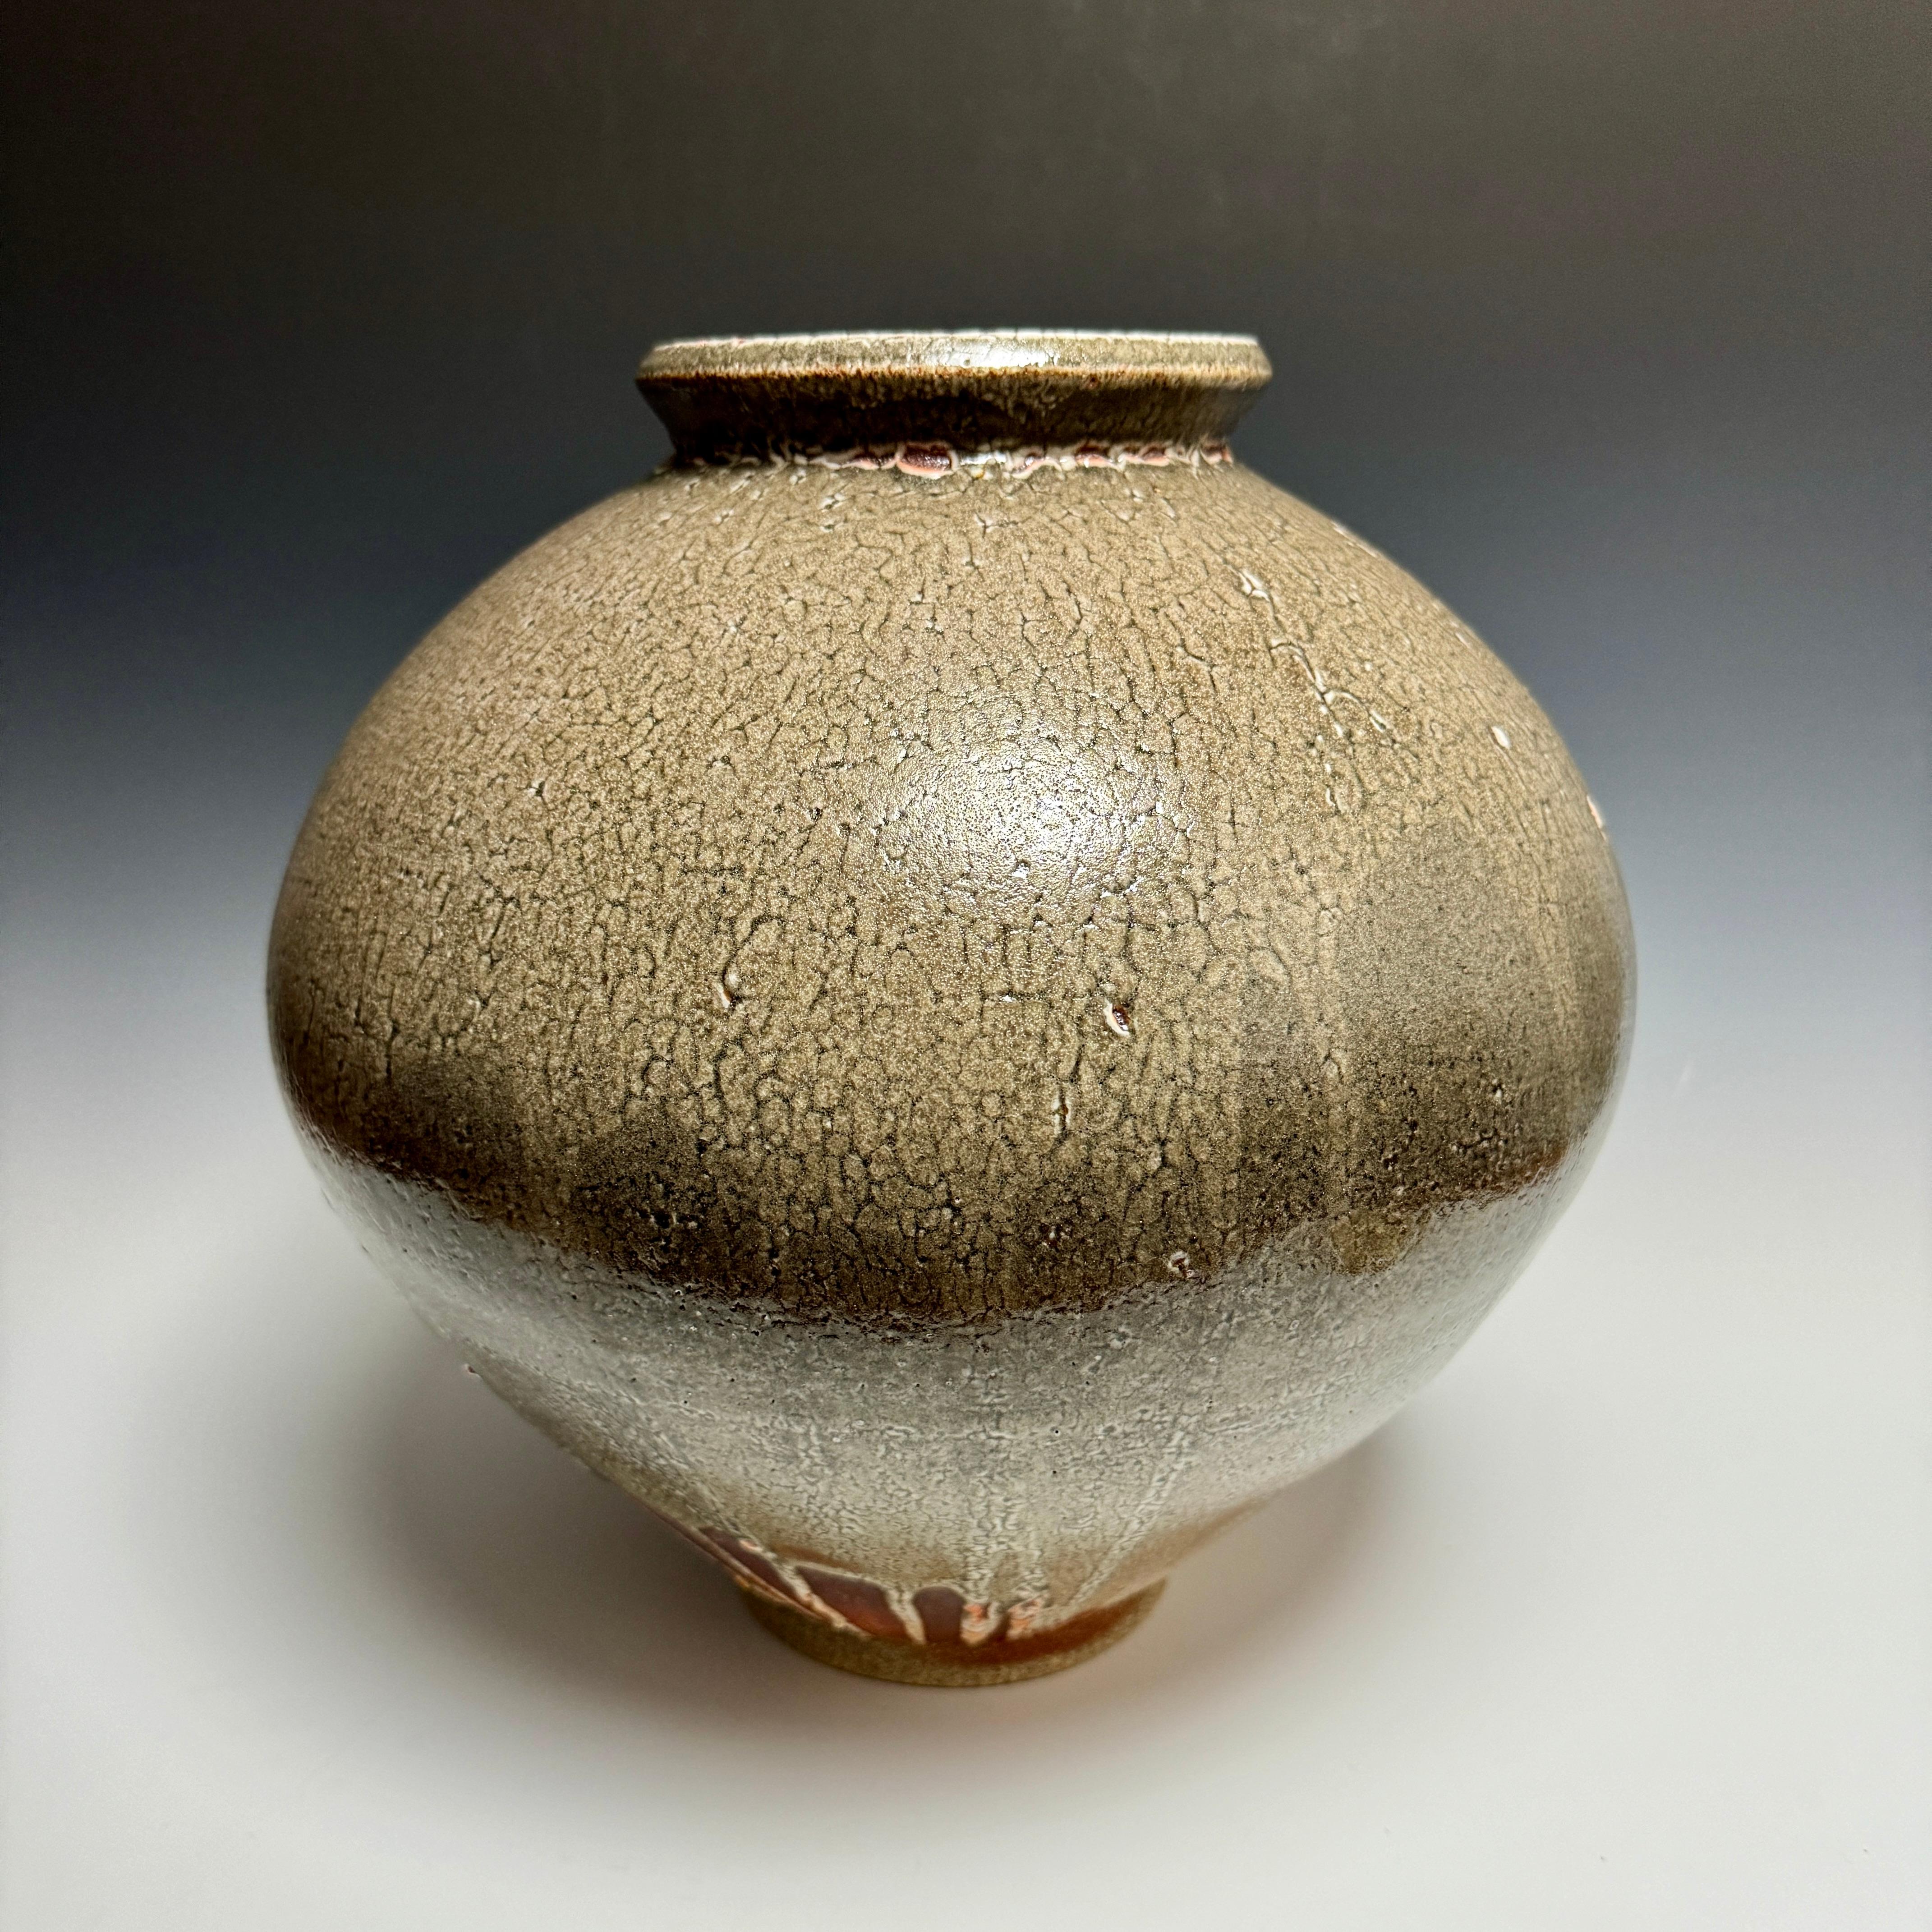 Shino Glazed Tsubo by Jason Fox.

A Southern Californian for over half his life, Contemporary Ceramic Artist Jason Fox draws upon his classical education in Architecture and Art History as well as his love of surfing and the ocean. He works